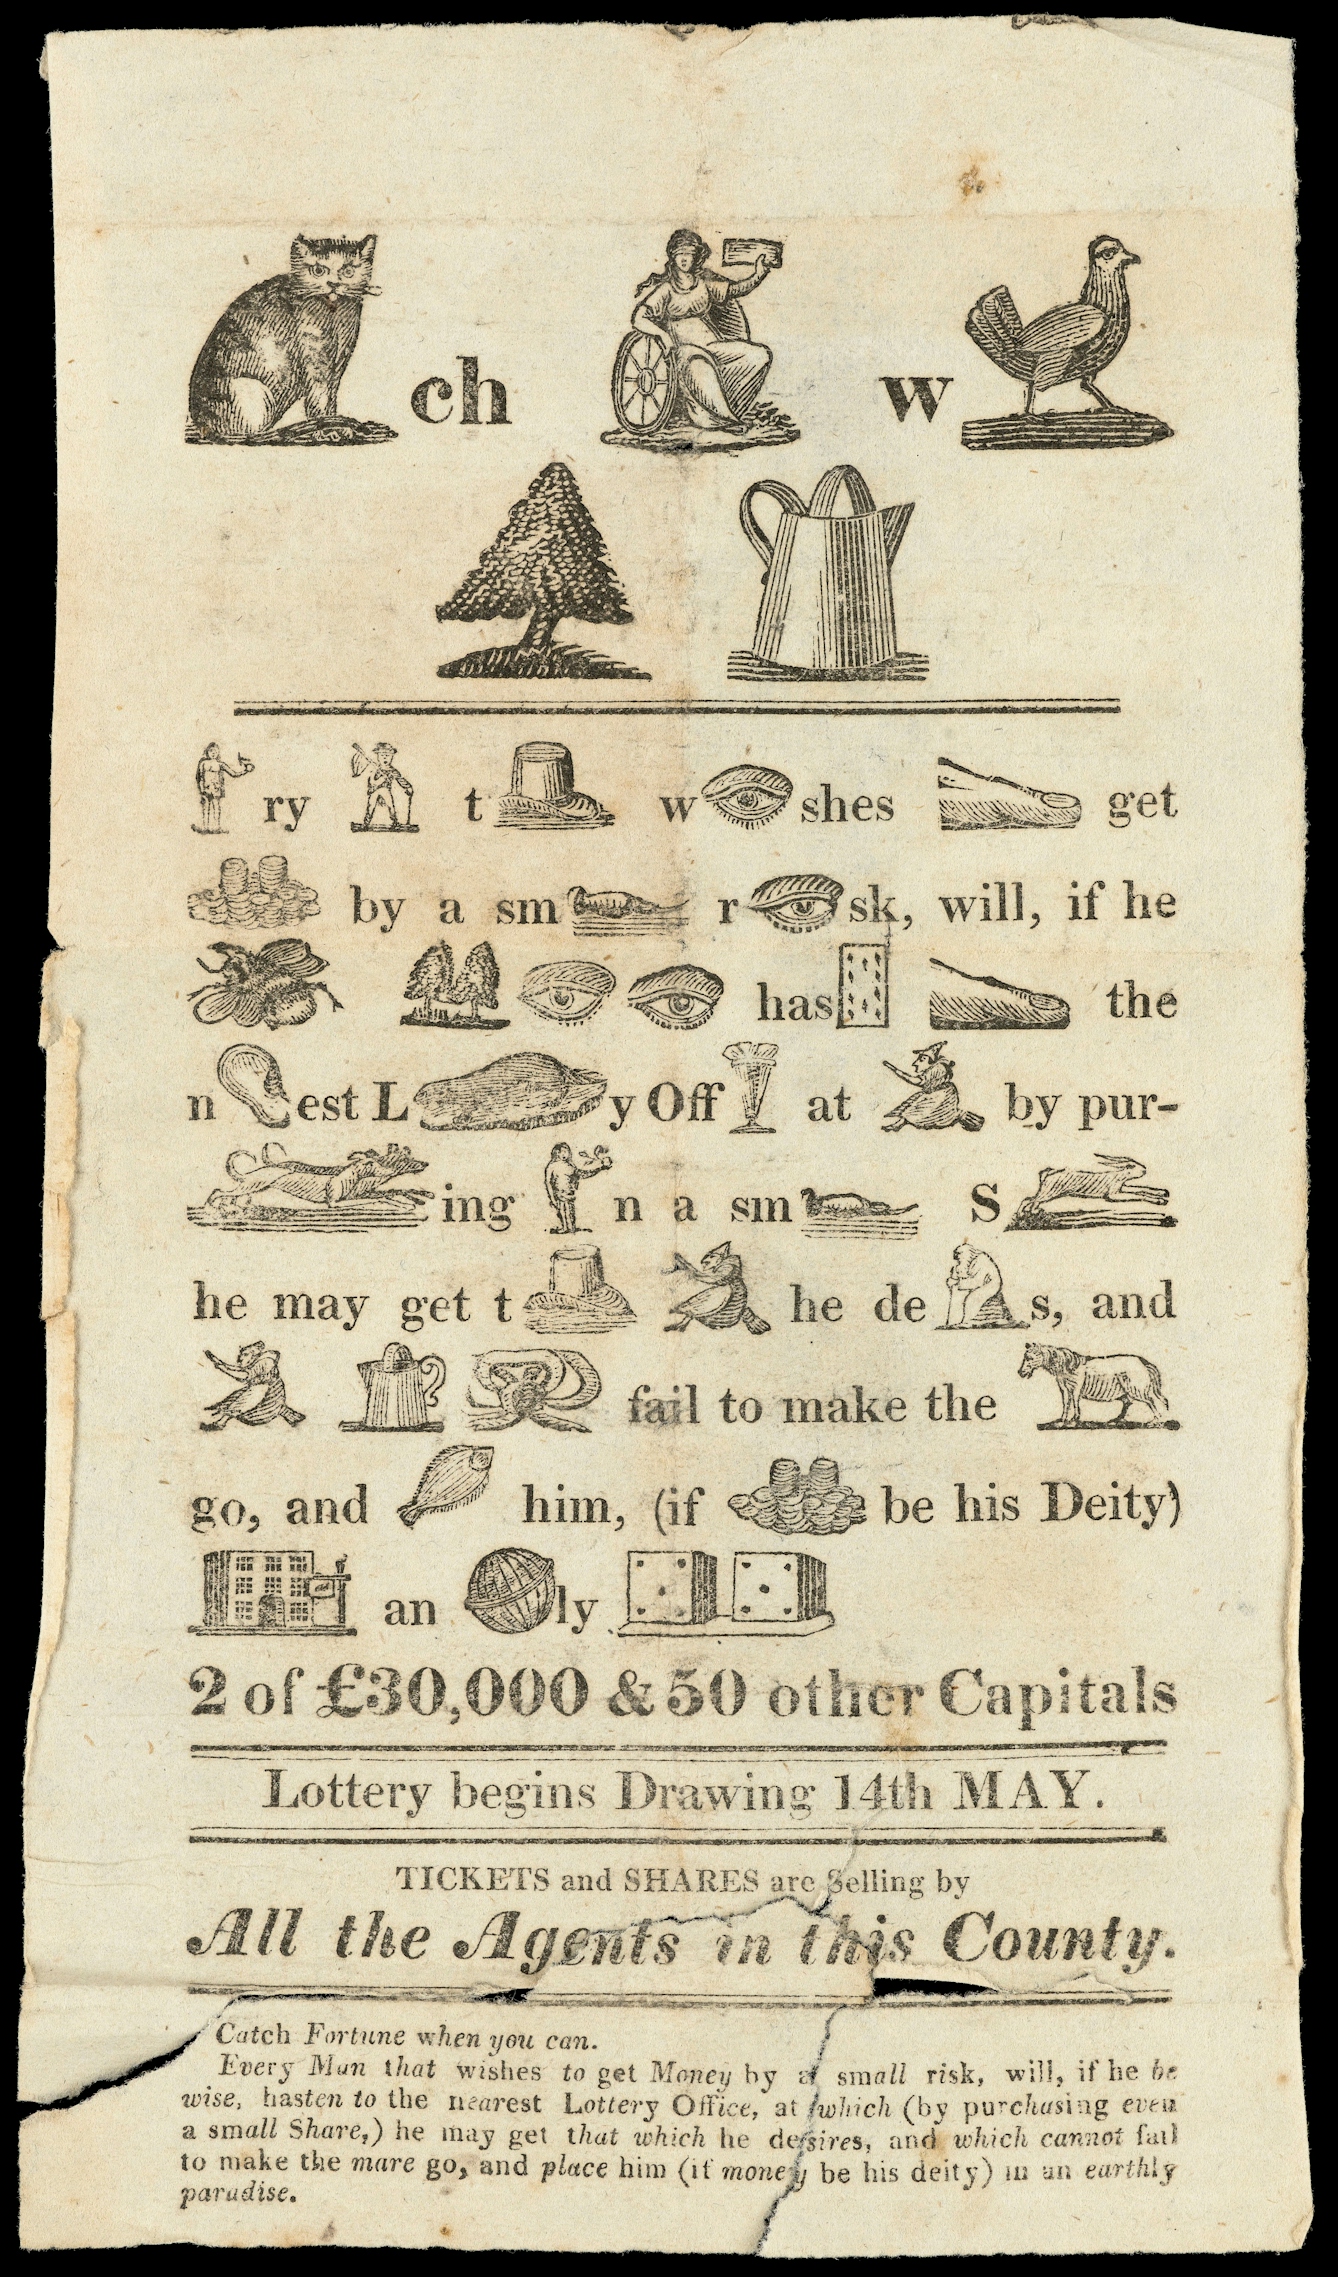 Printed pamphlet with pictograms encouraging people to play the lottery.